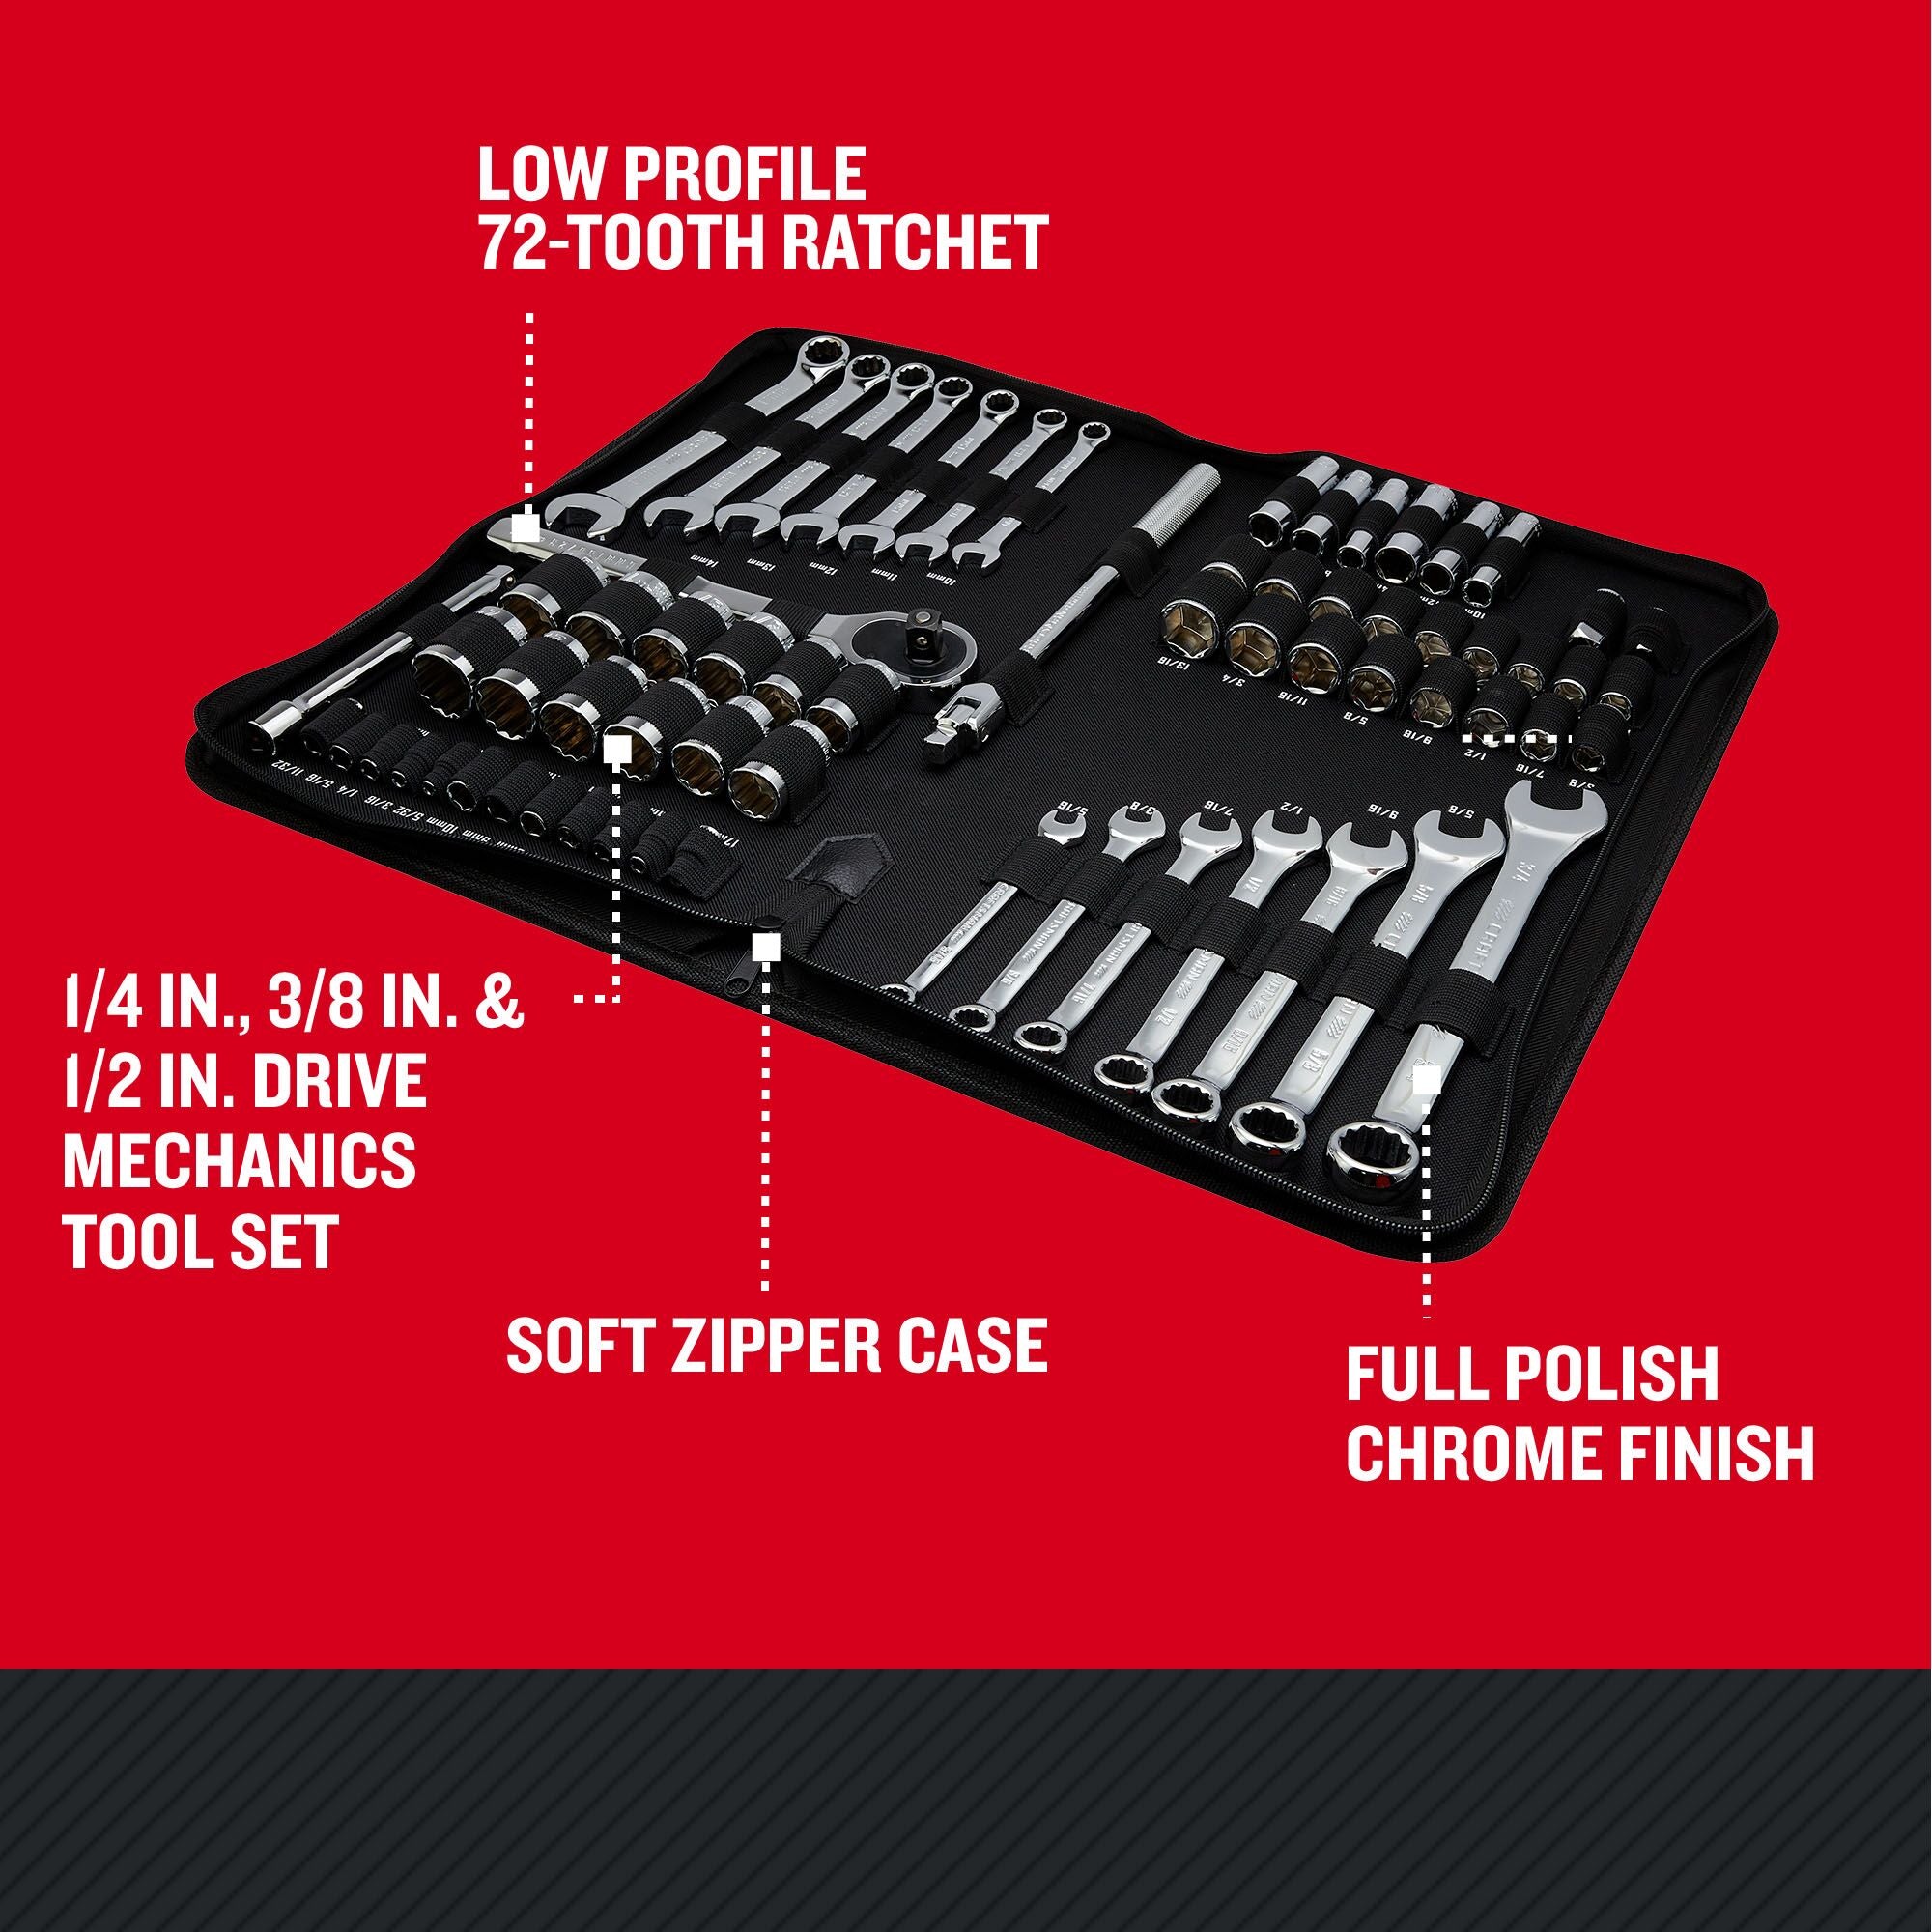 CRAFTSMAN Low Profile 66 piece 3/8 inch drive MOBILE MECHANICS TOOL SET with features and benefits highlighted